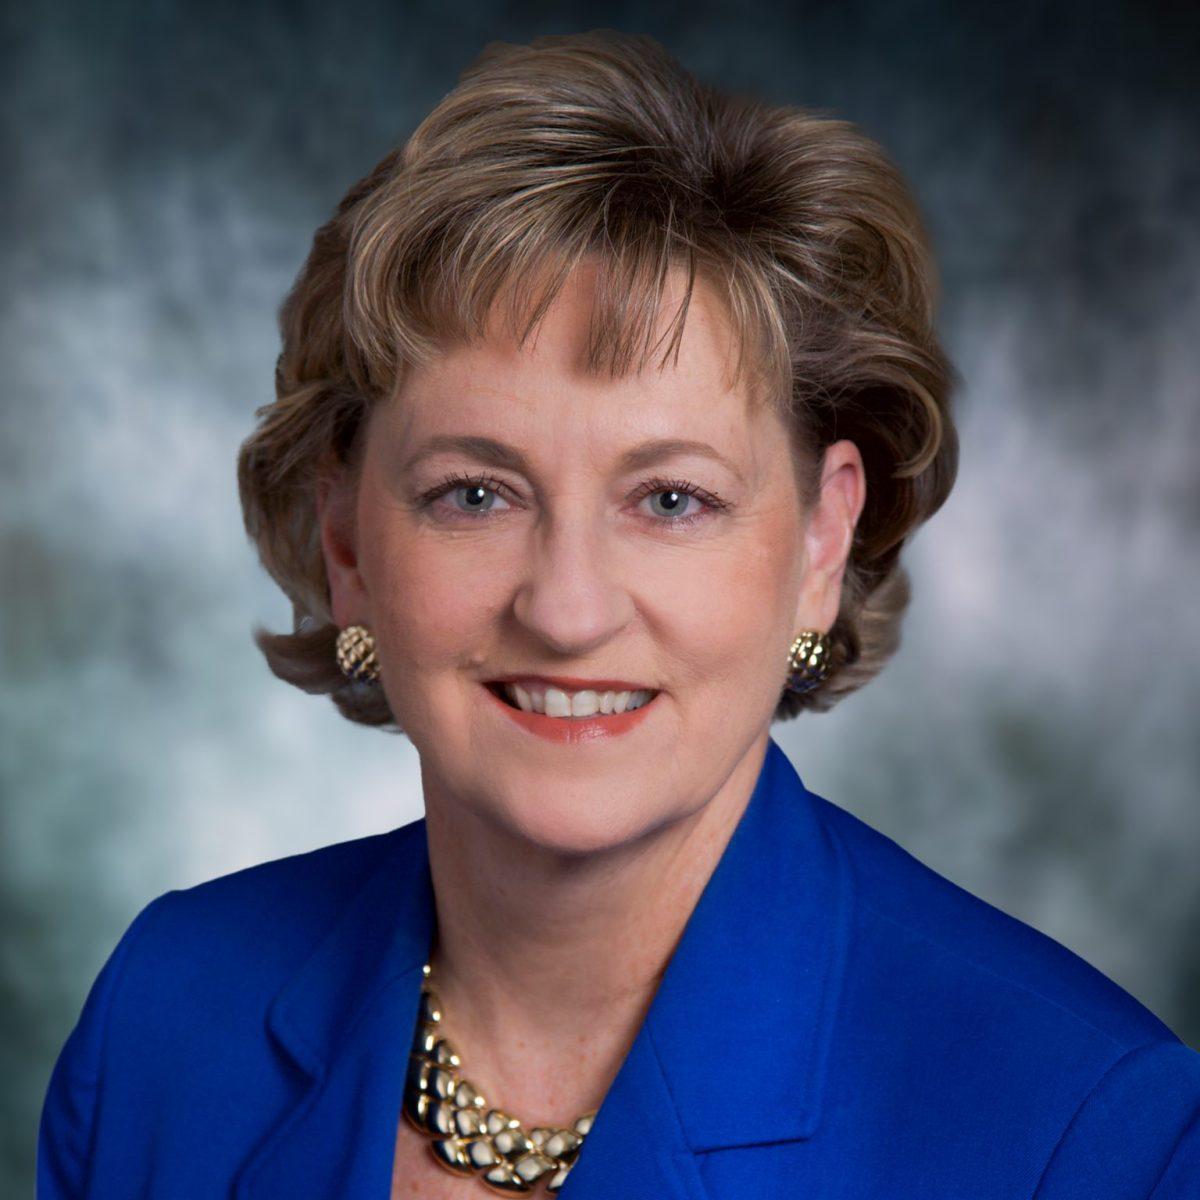 Anne Reber, vice president for student affairs, will retire Dec. 31 after a 30-year career at Texas A&M. (Image provided by Texas A&M Division of Student Affairs)  